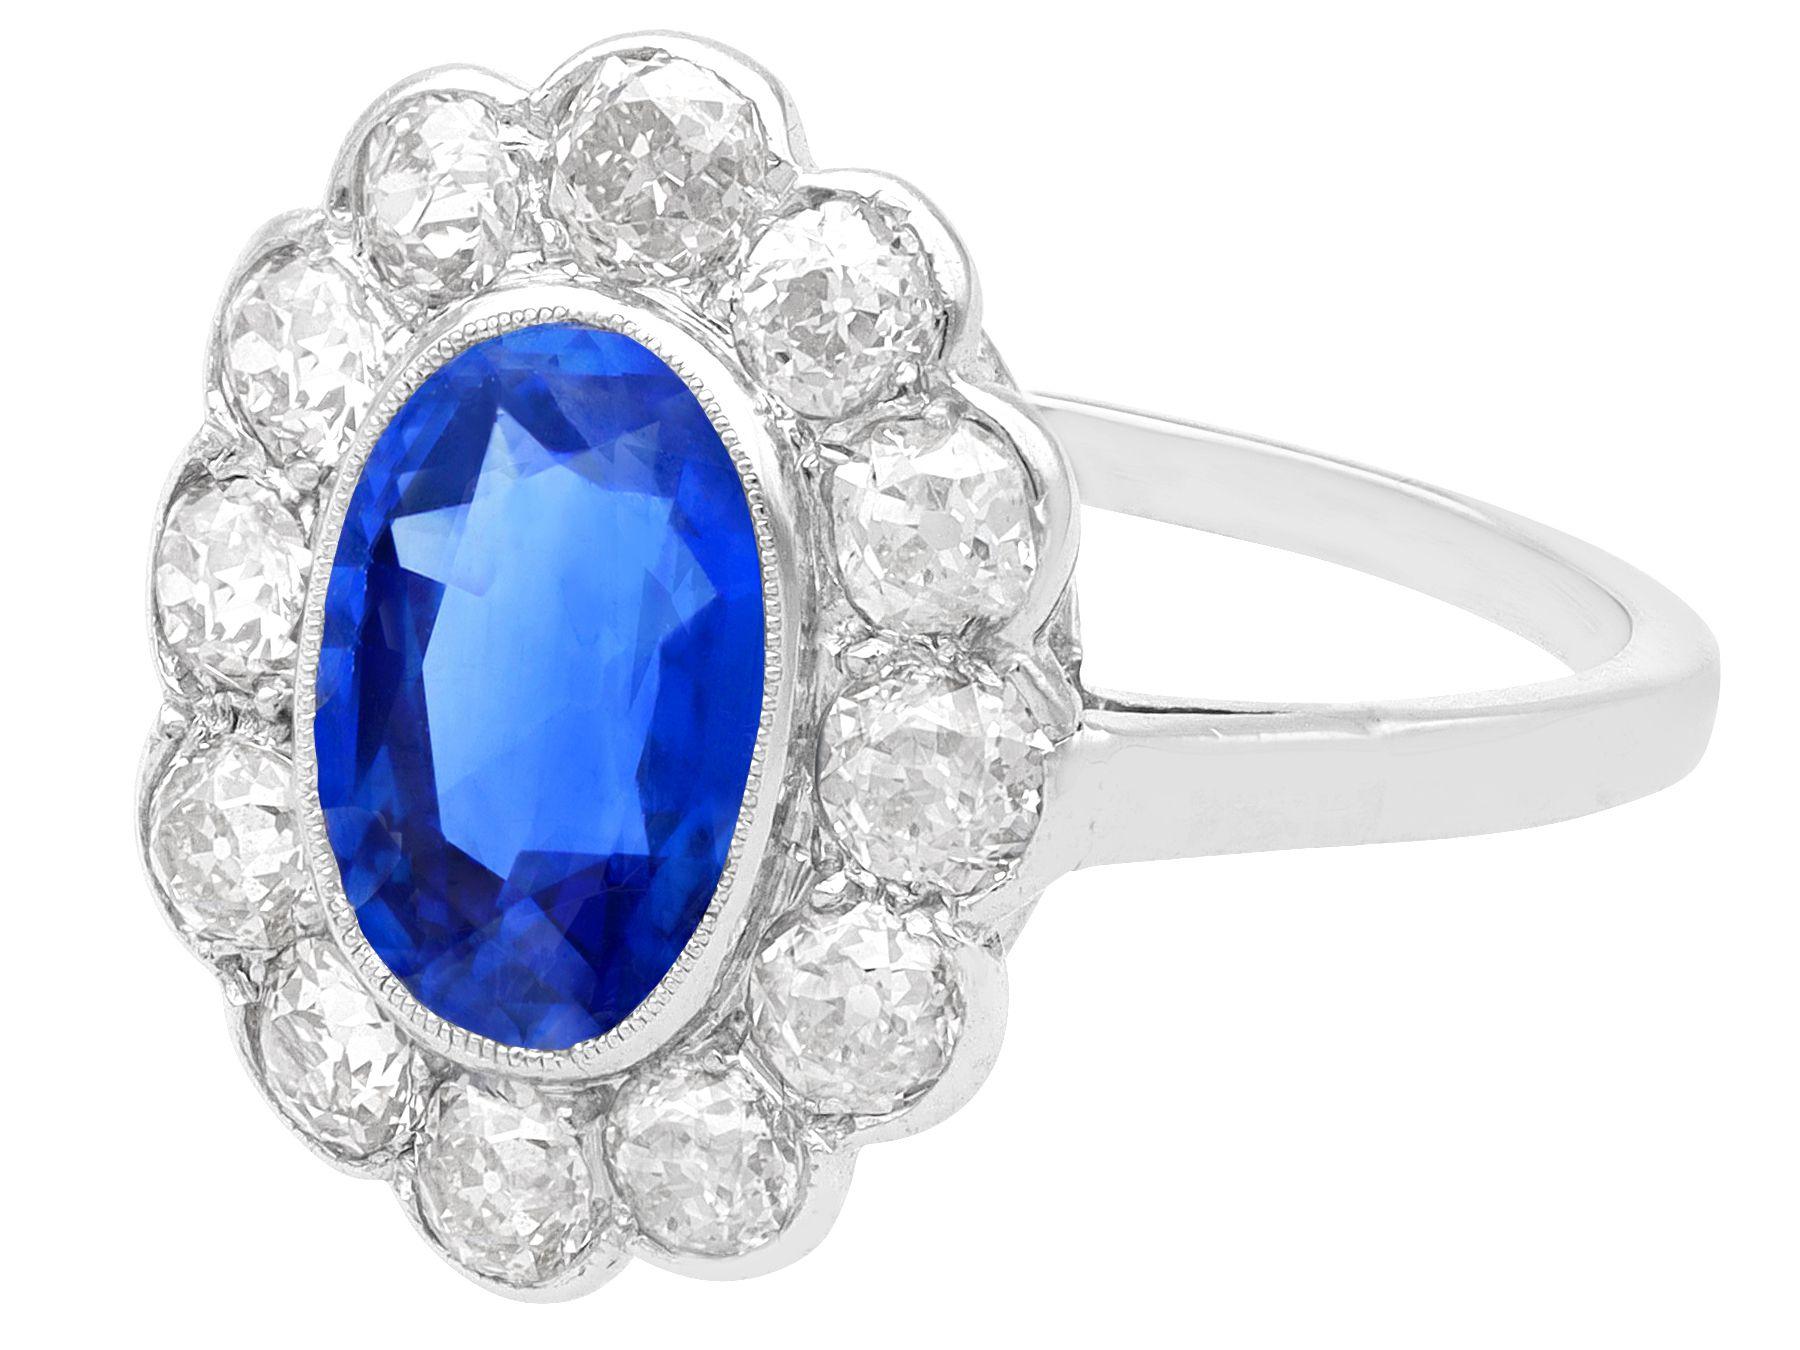 Oval Cut Antique 2.71 Carat Sapphire and 1.42 Carat Diamond 18k White Gold Cluster Ring